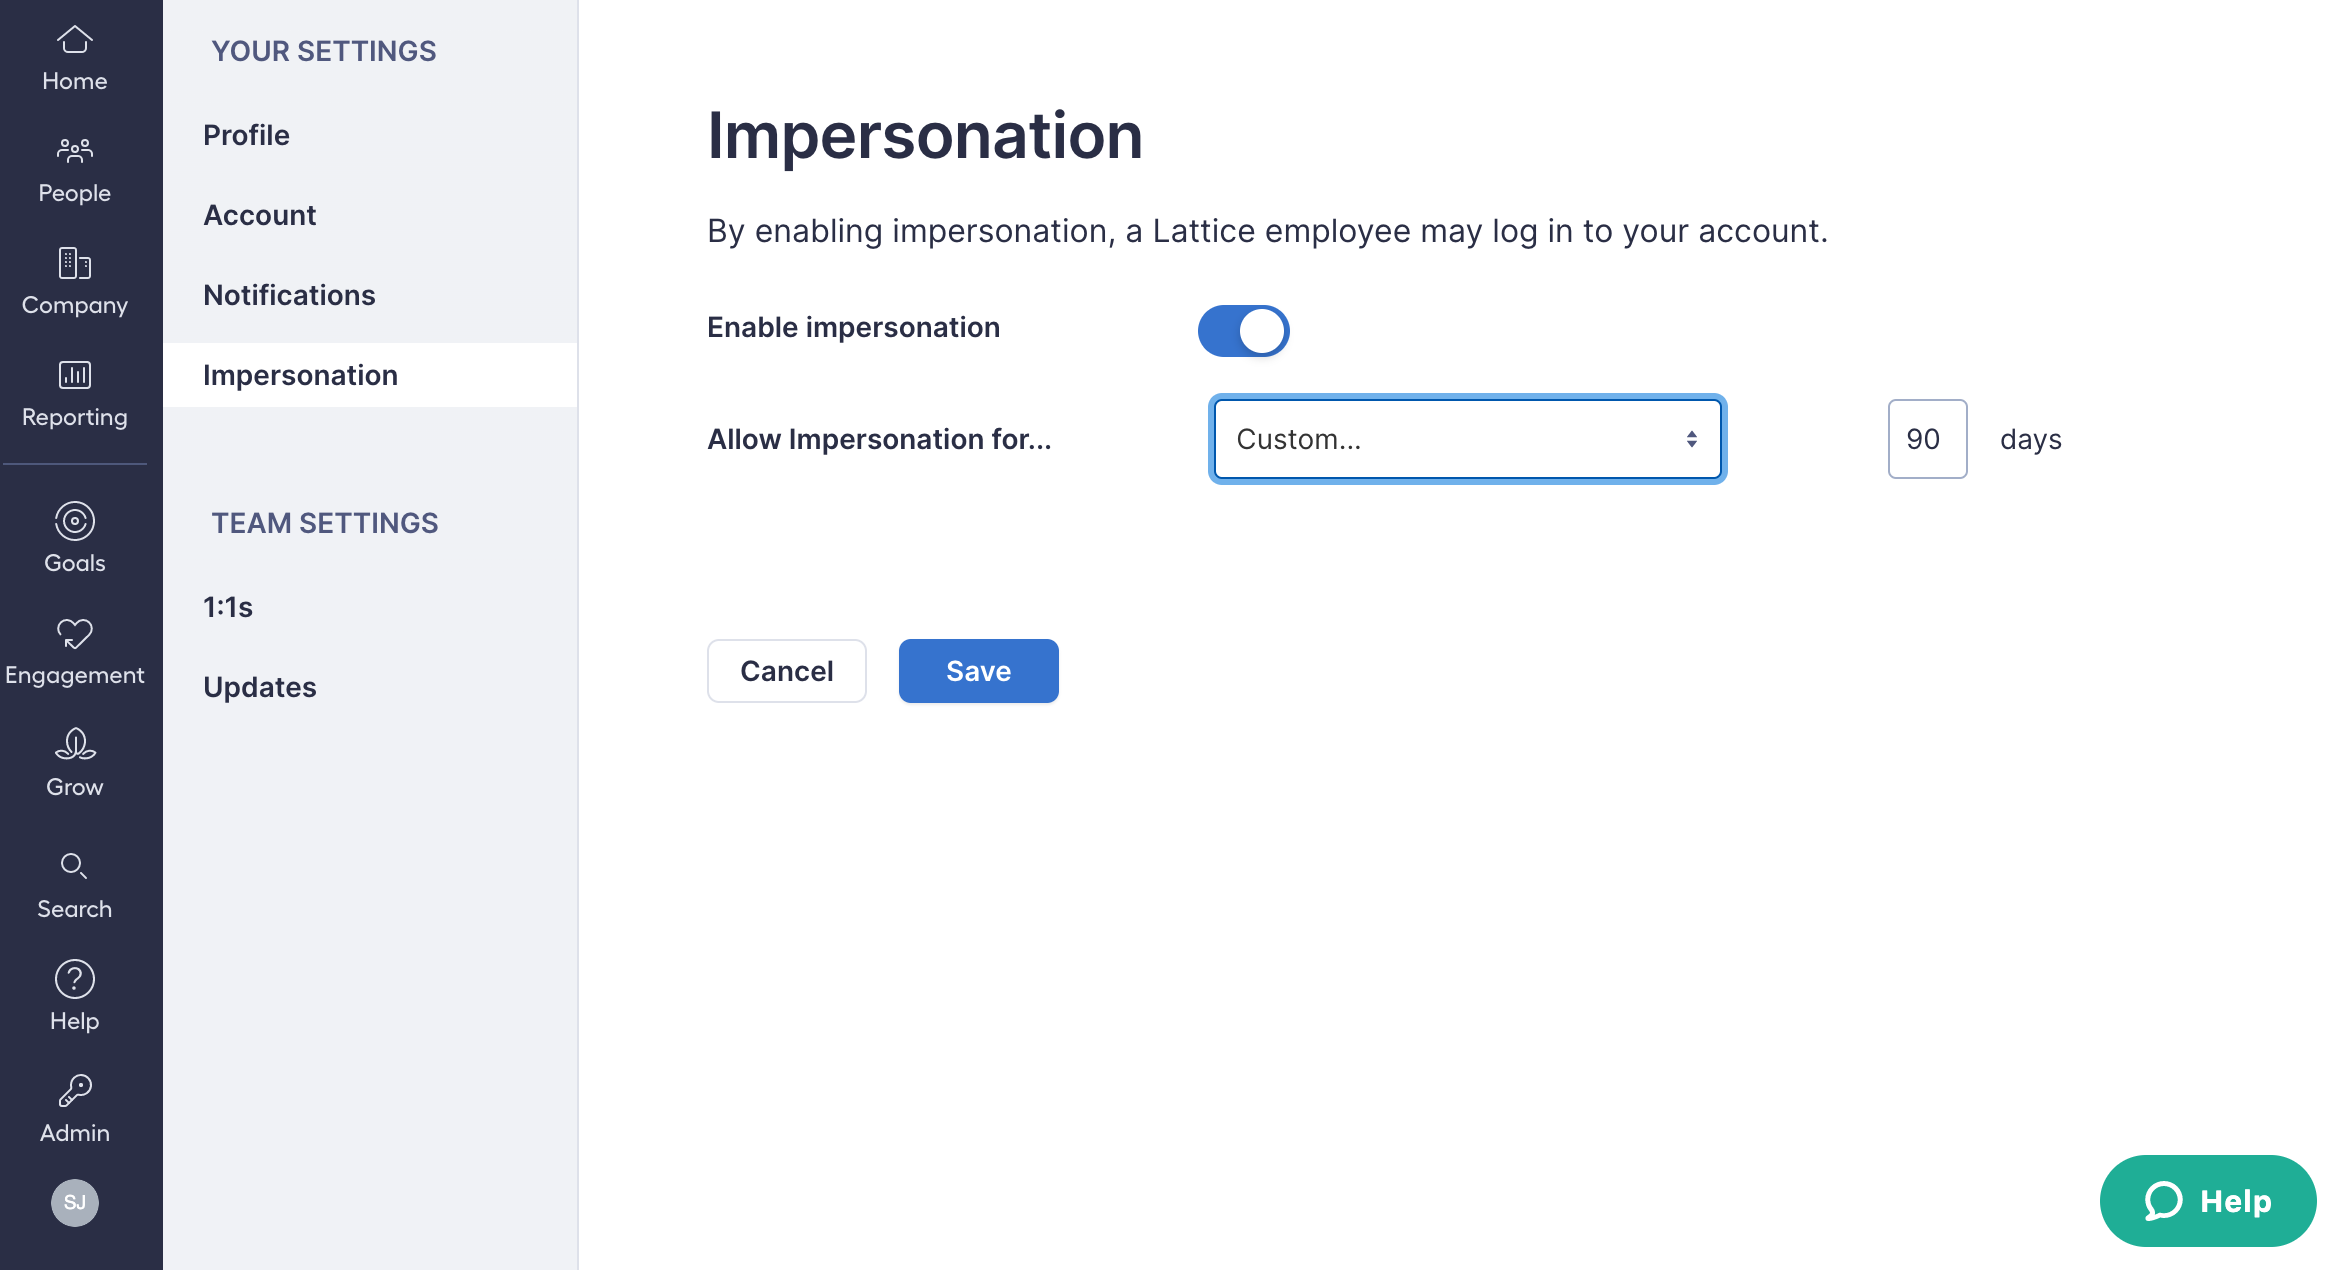 Image of Lattice Impersonations page